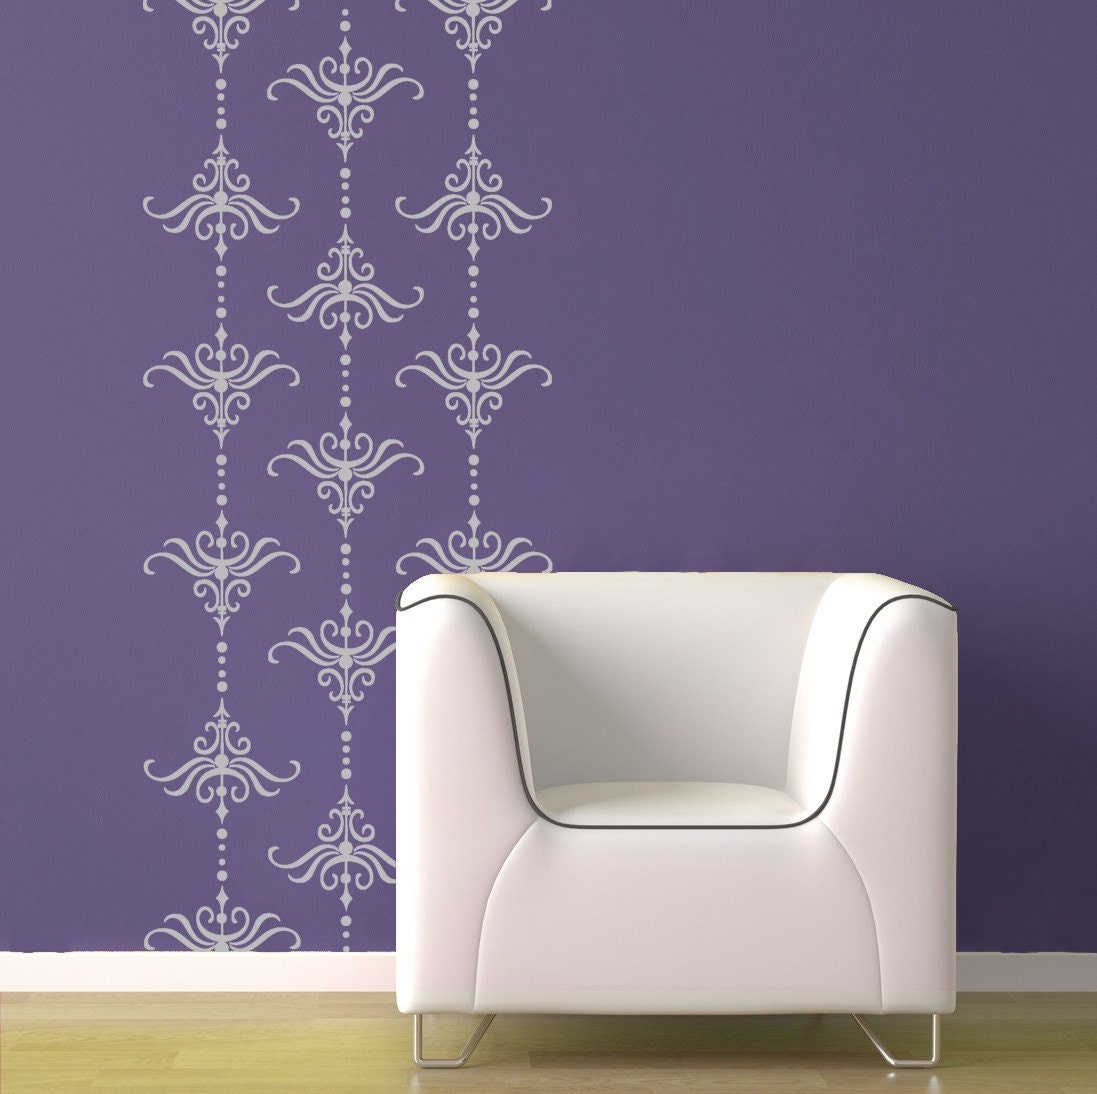 Vintage Style Damask Vinyl Wall Decals - 18